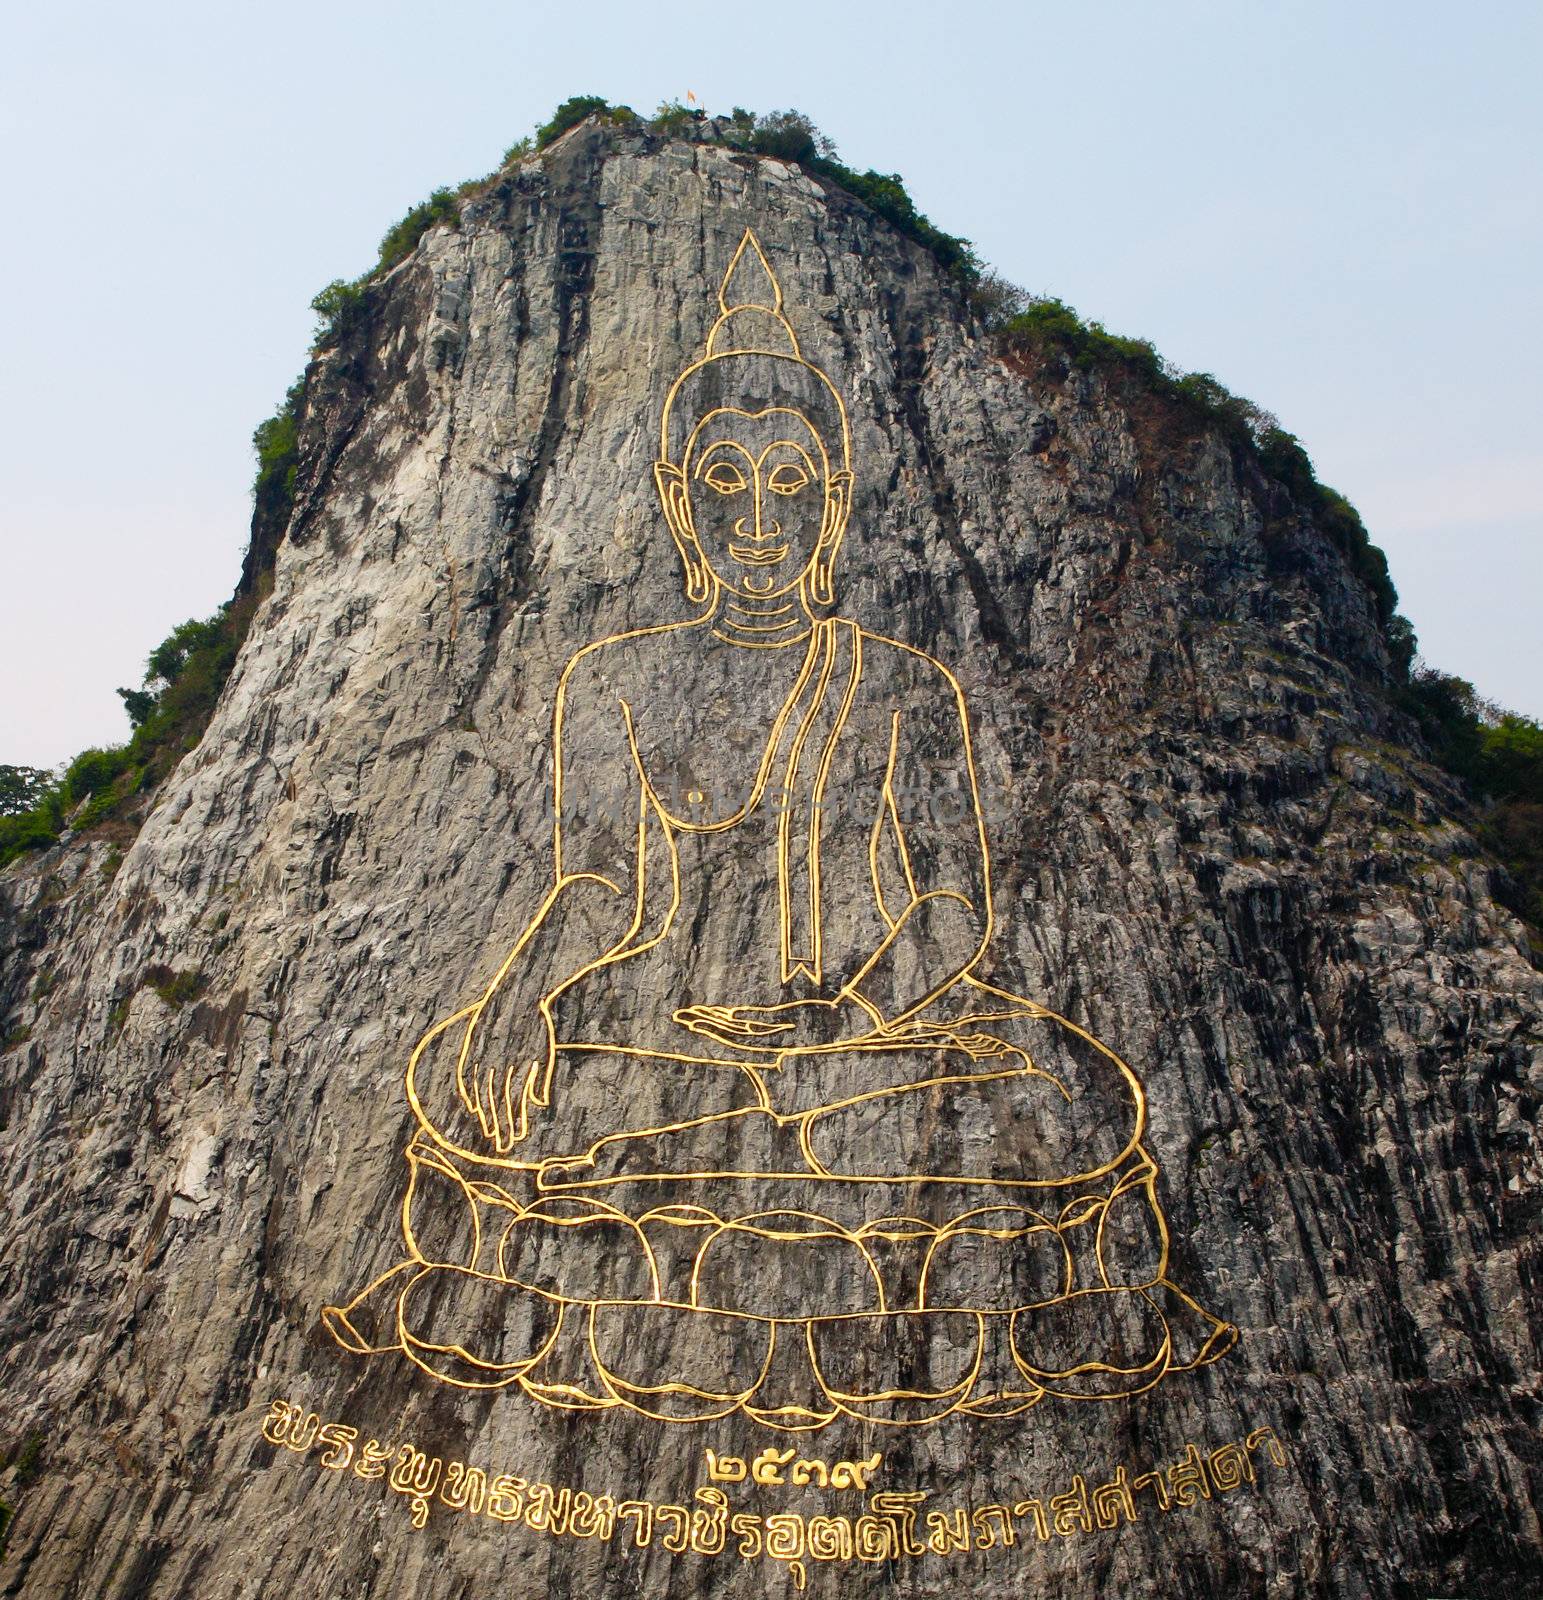 130 mtr high golden Buddha laser carved and inlayed with gold on by geargodz